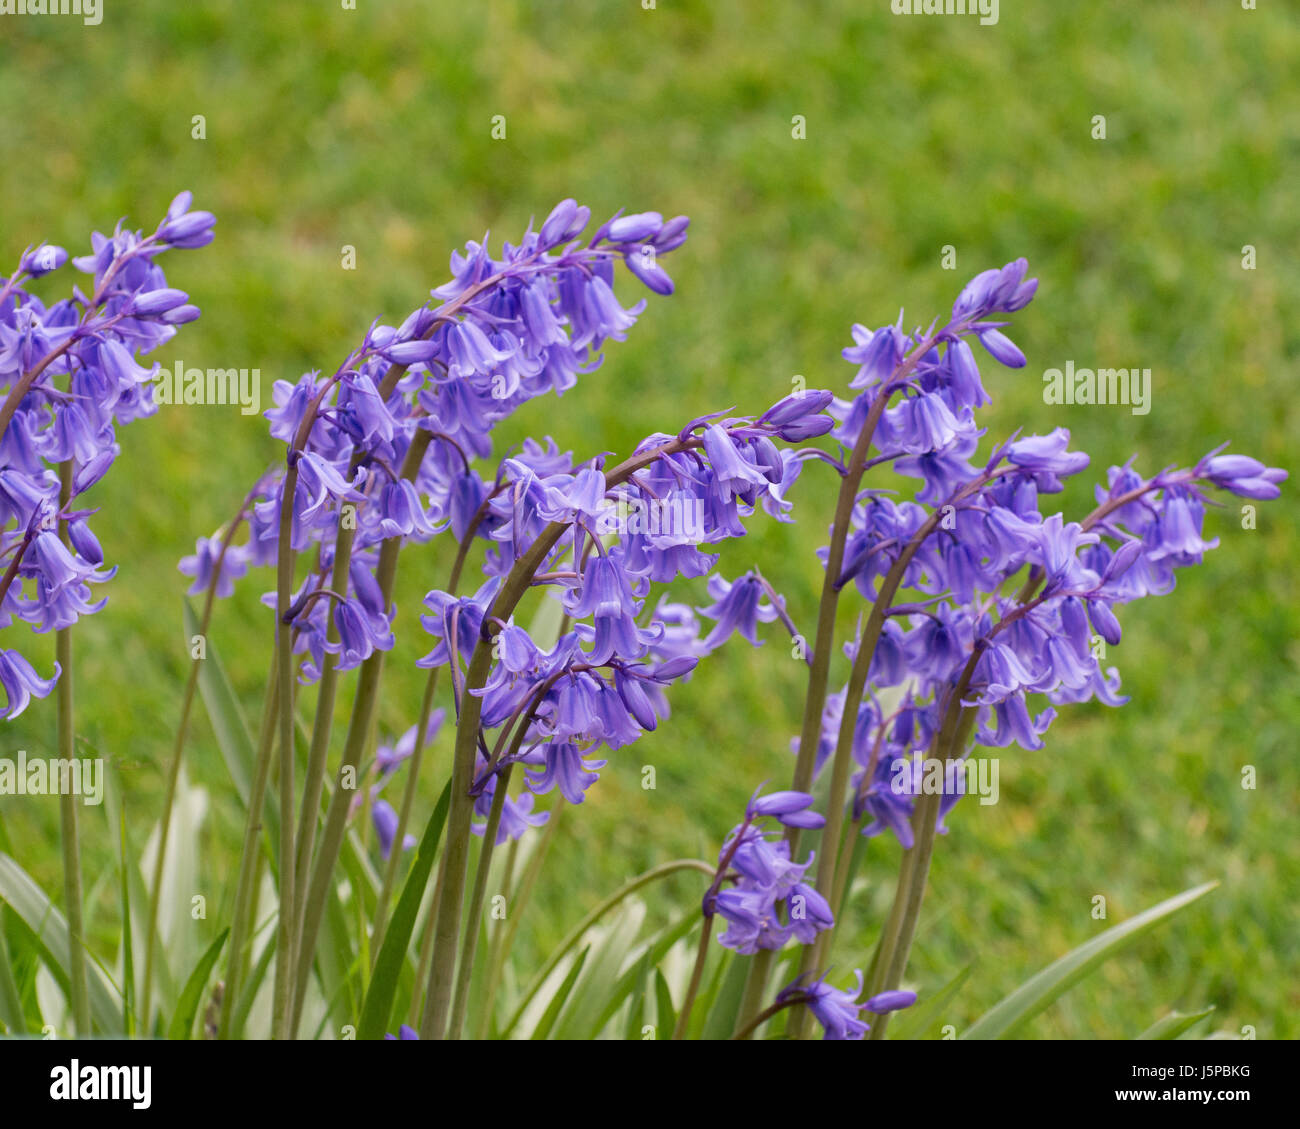 An example of flowering Hyacinthoides x massartiana hybrid bluebell in a garden setting Stock Photo